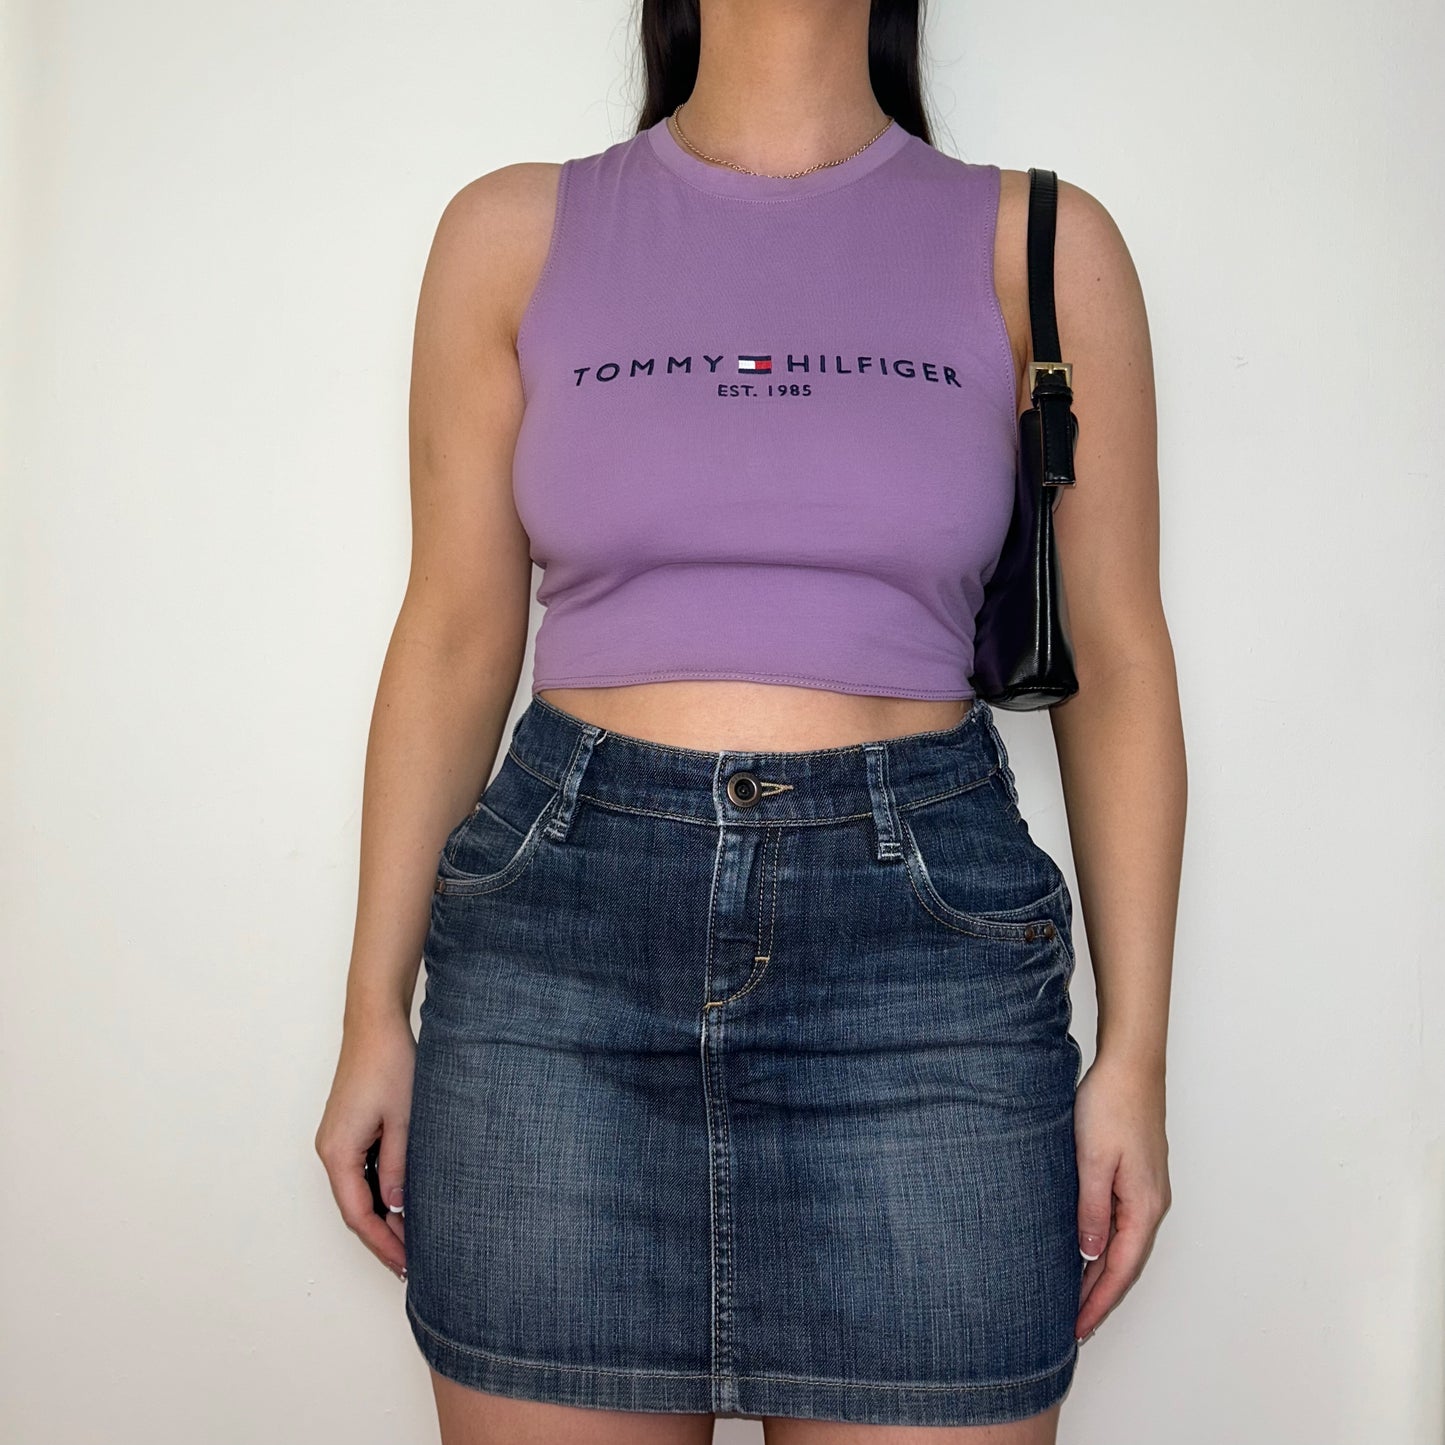 lilac sleeveless crop top with black tommy hilfiger logo shown on a model wearing a denim mini skirt and black shoulder bag